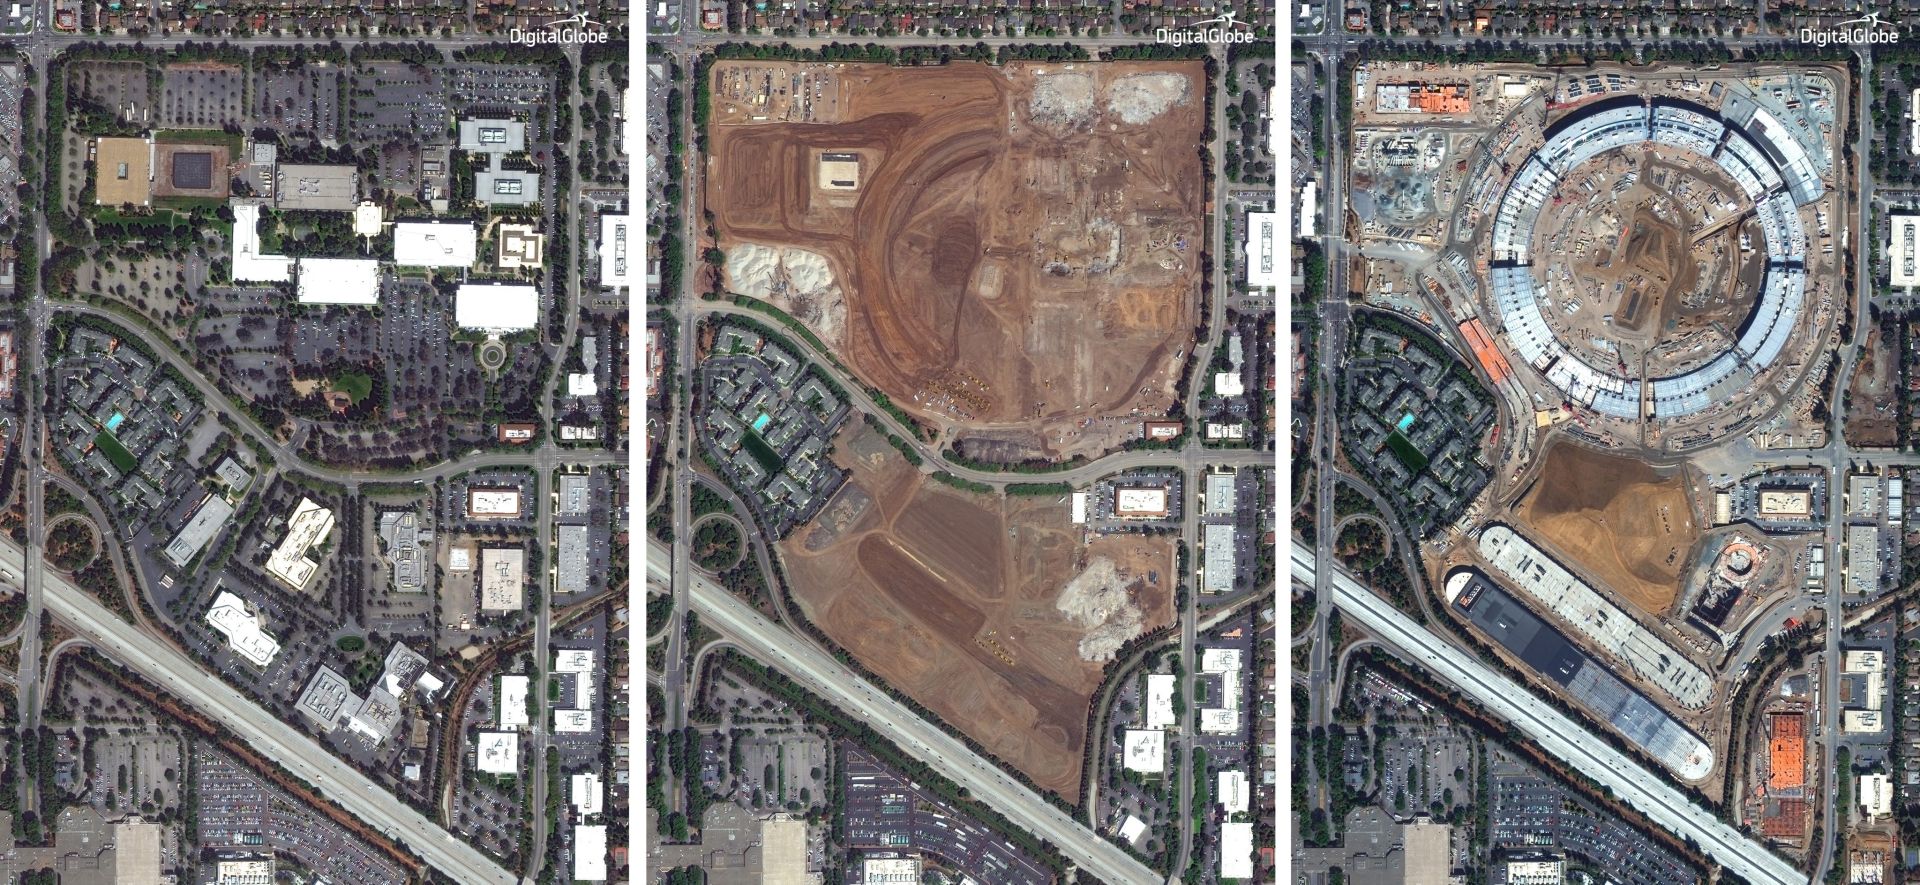 epa05224405 A composite handout satellite image by DigitalGlobe showing a view of the construction site of Apple Campus 2 building at the in Cupertino, California, USA as it develops during the time. Images from L-R are dated 30 August 2012, 14 April 2014 and 25 September 2015 (issued 21 March 2016). The new Apple Campus, designed by star architect office Norman Foster and Partners in the form of a giant circle, has a dimension of 1.6 kilometers circumference and a diameter of almost half a kilometer. The building encompasses roughly 260,000 square meters, will be powered by 100 percent renewable energy and is to house up to 13,000 employees.  EPA/DIGITALGLOBE / HANDOUT Image courtesy DigitalGlobe © 2016. HANDOUT EDITORIAL USE ONLY/NO SALES